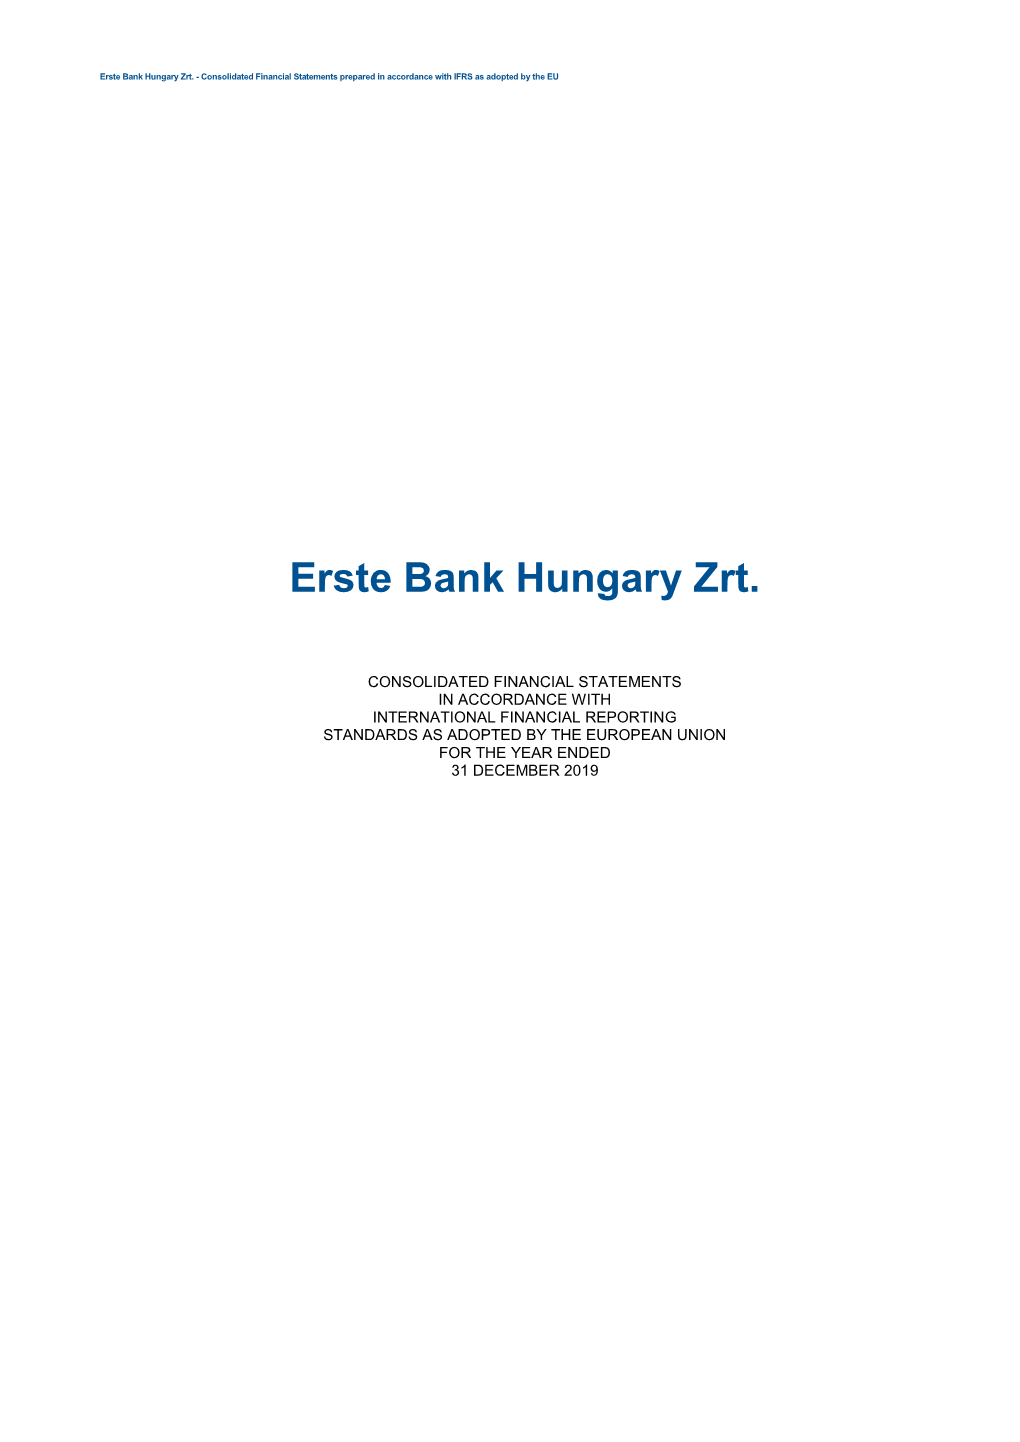 Erste Bank Hungary Zrt. - Consolidated Financial Statements Prepared in Accordance with IFRS As Adopted by the EU